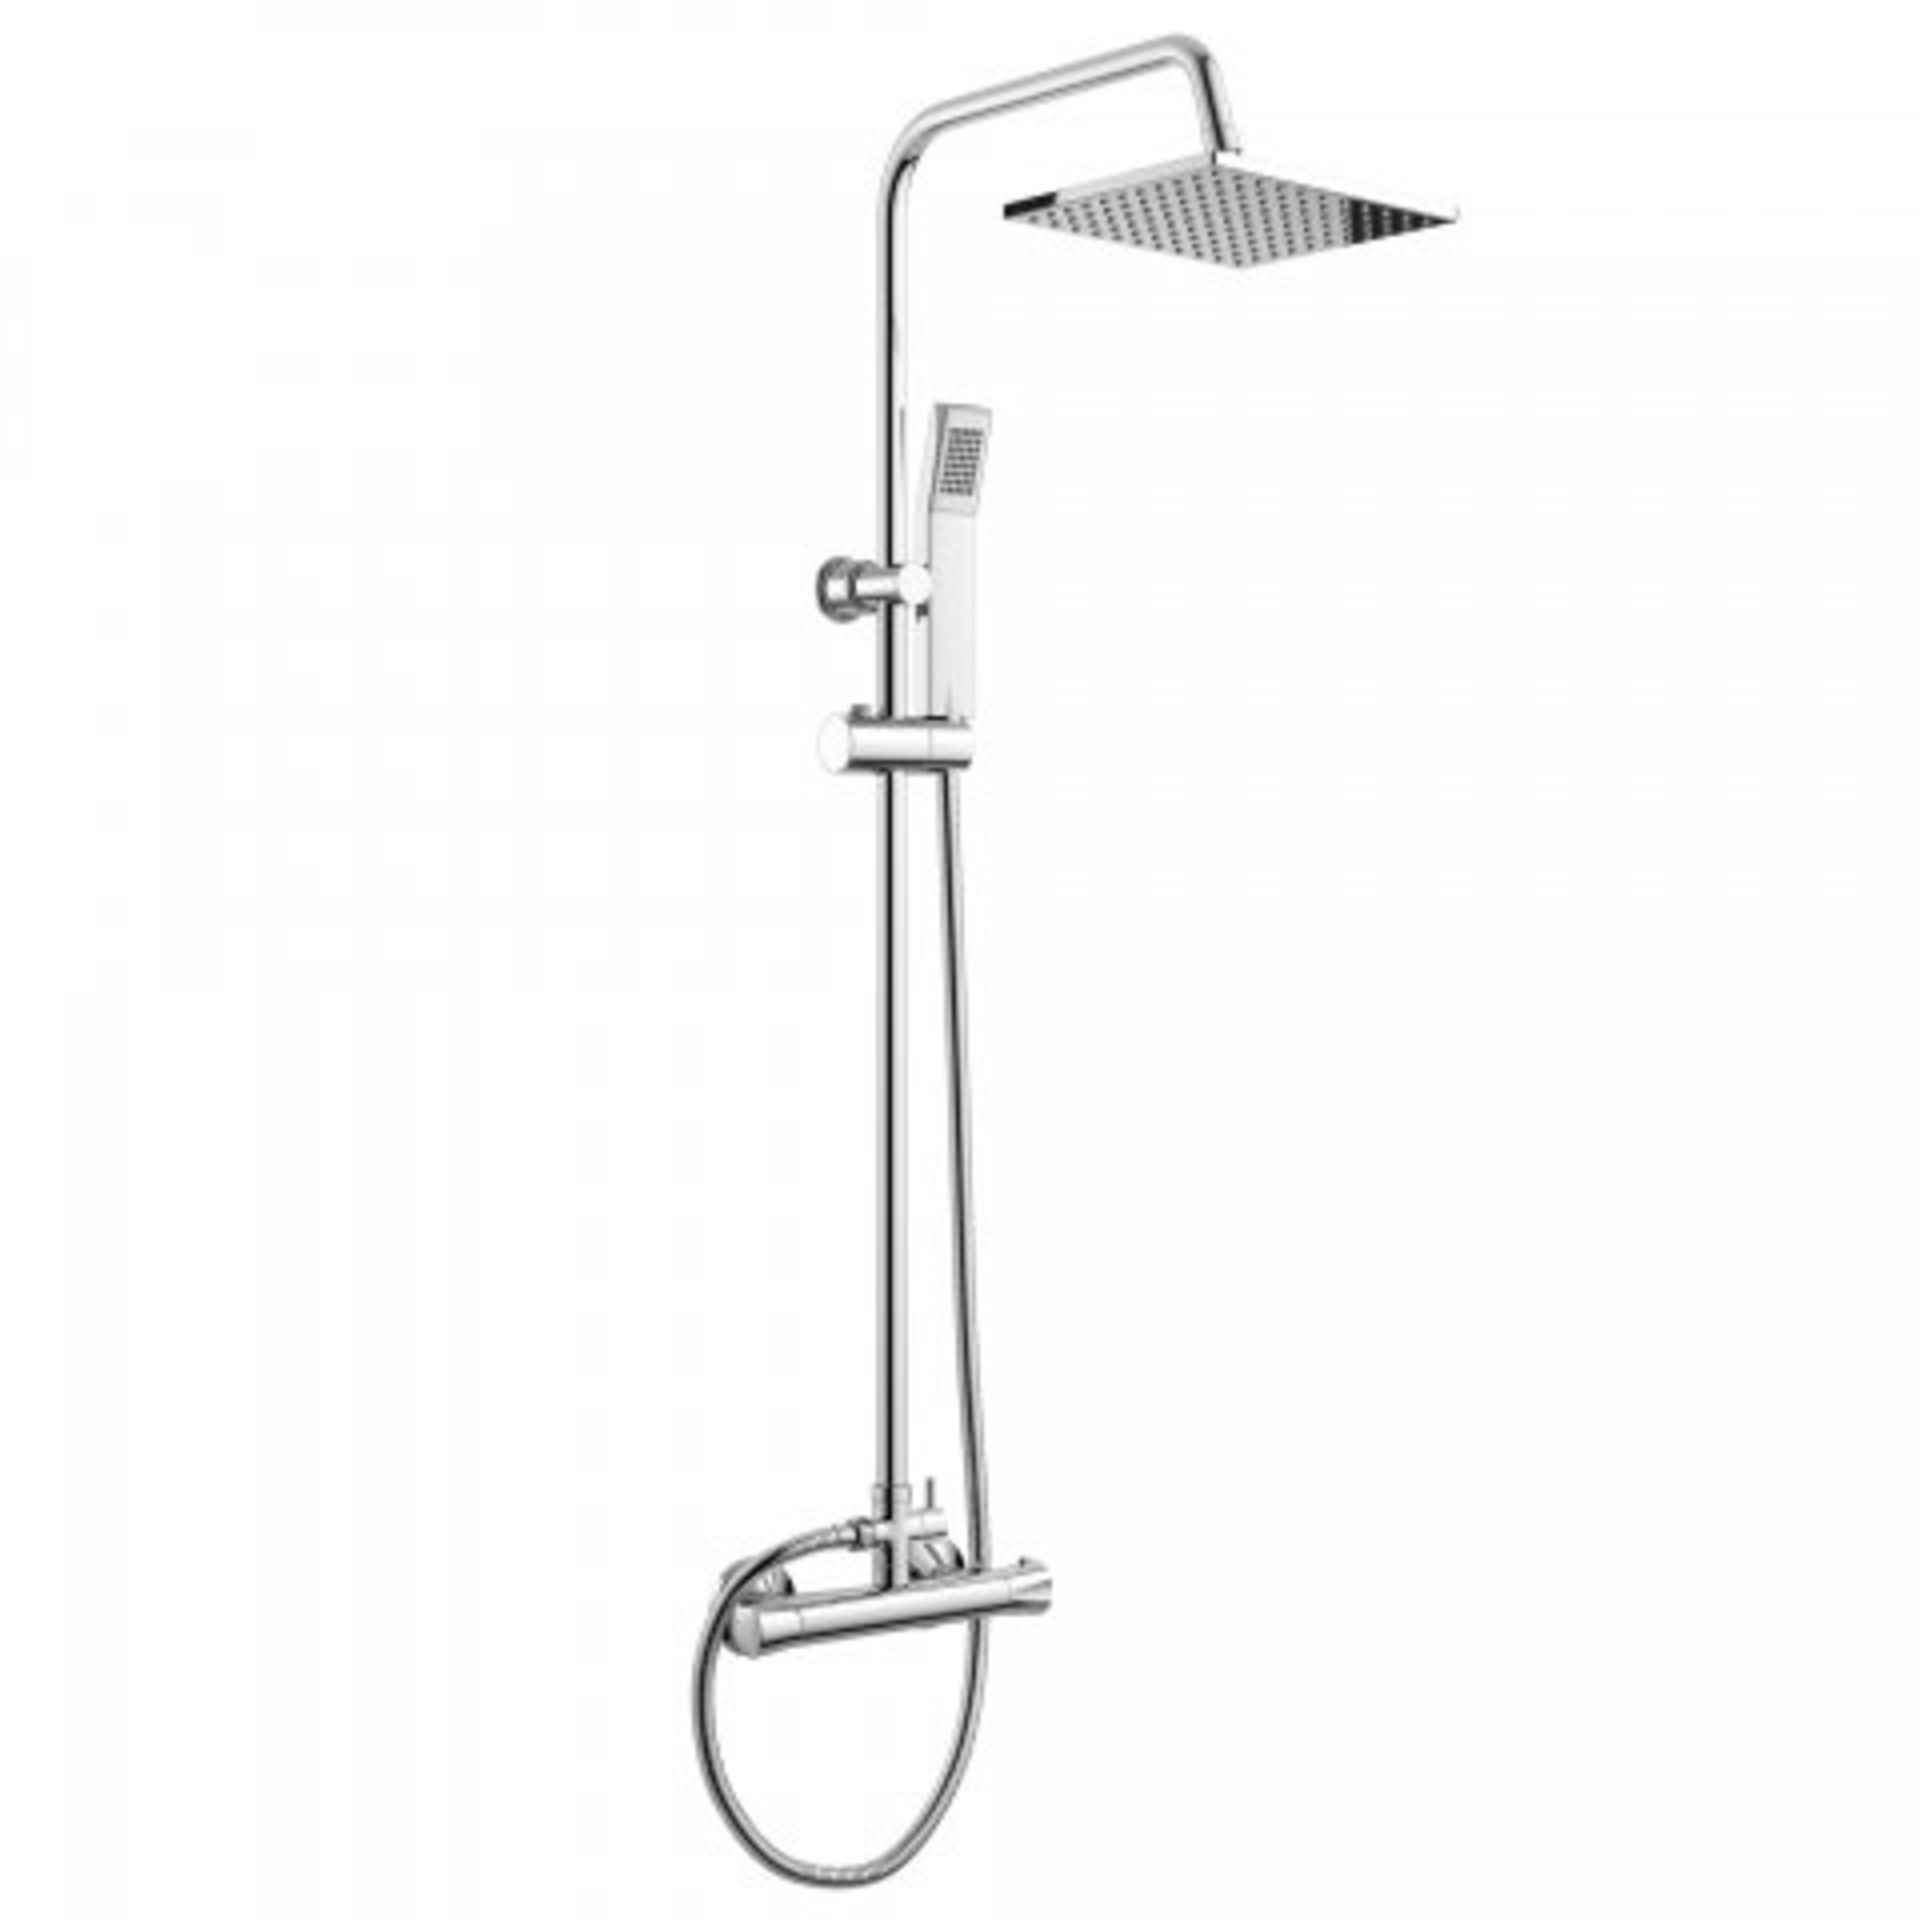 (O211) 200mm Square Head Thermostatic Exposed Shower Kit & Hand Held. RRP £249.99. Simplistic - Image 3 of 5